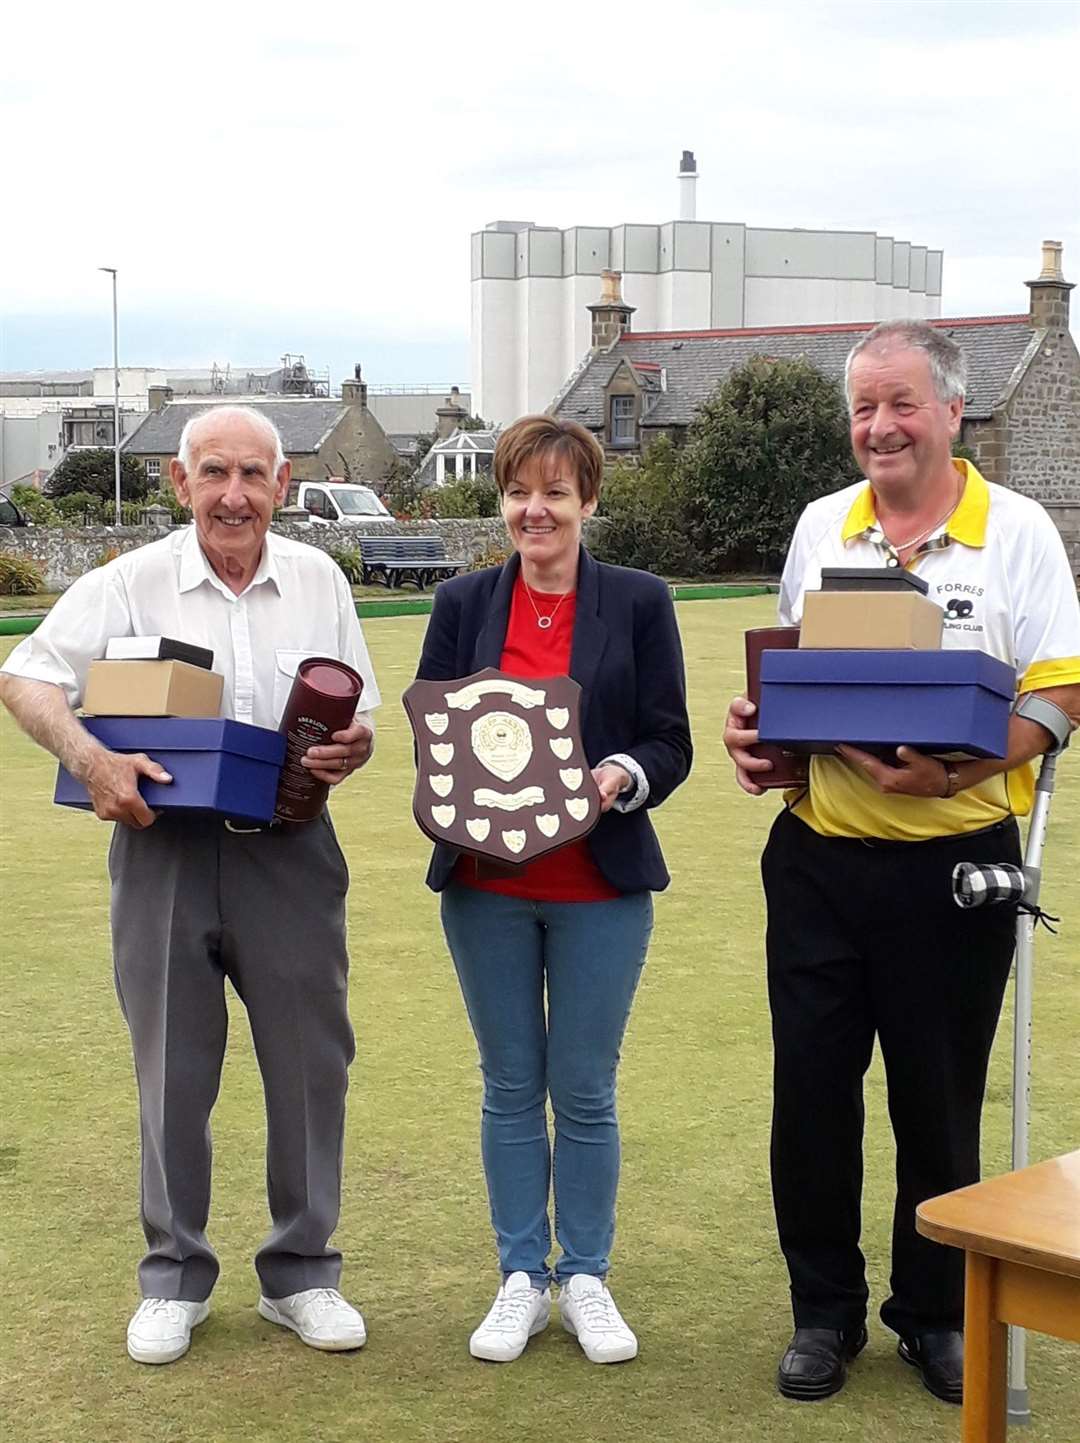 Stuart Roberton (left) and John Ross receive the Murray Cormie trophy from Audrey Christie, whose late father the tournament is held in memory of.